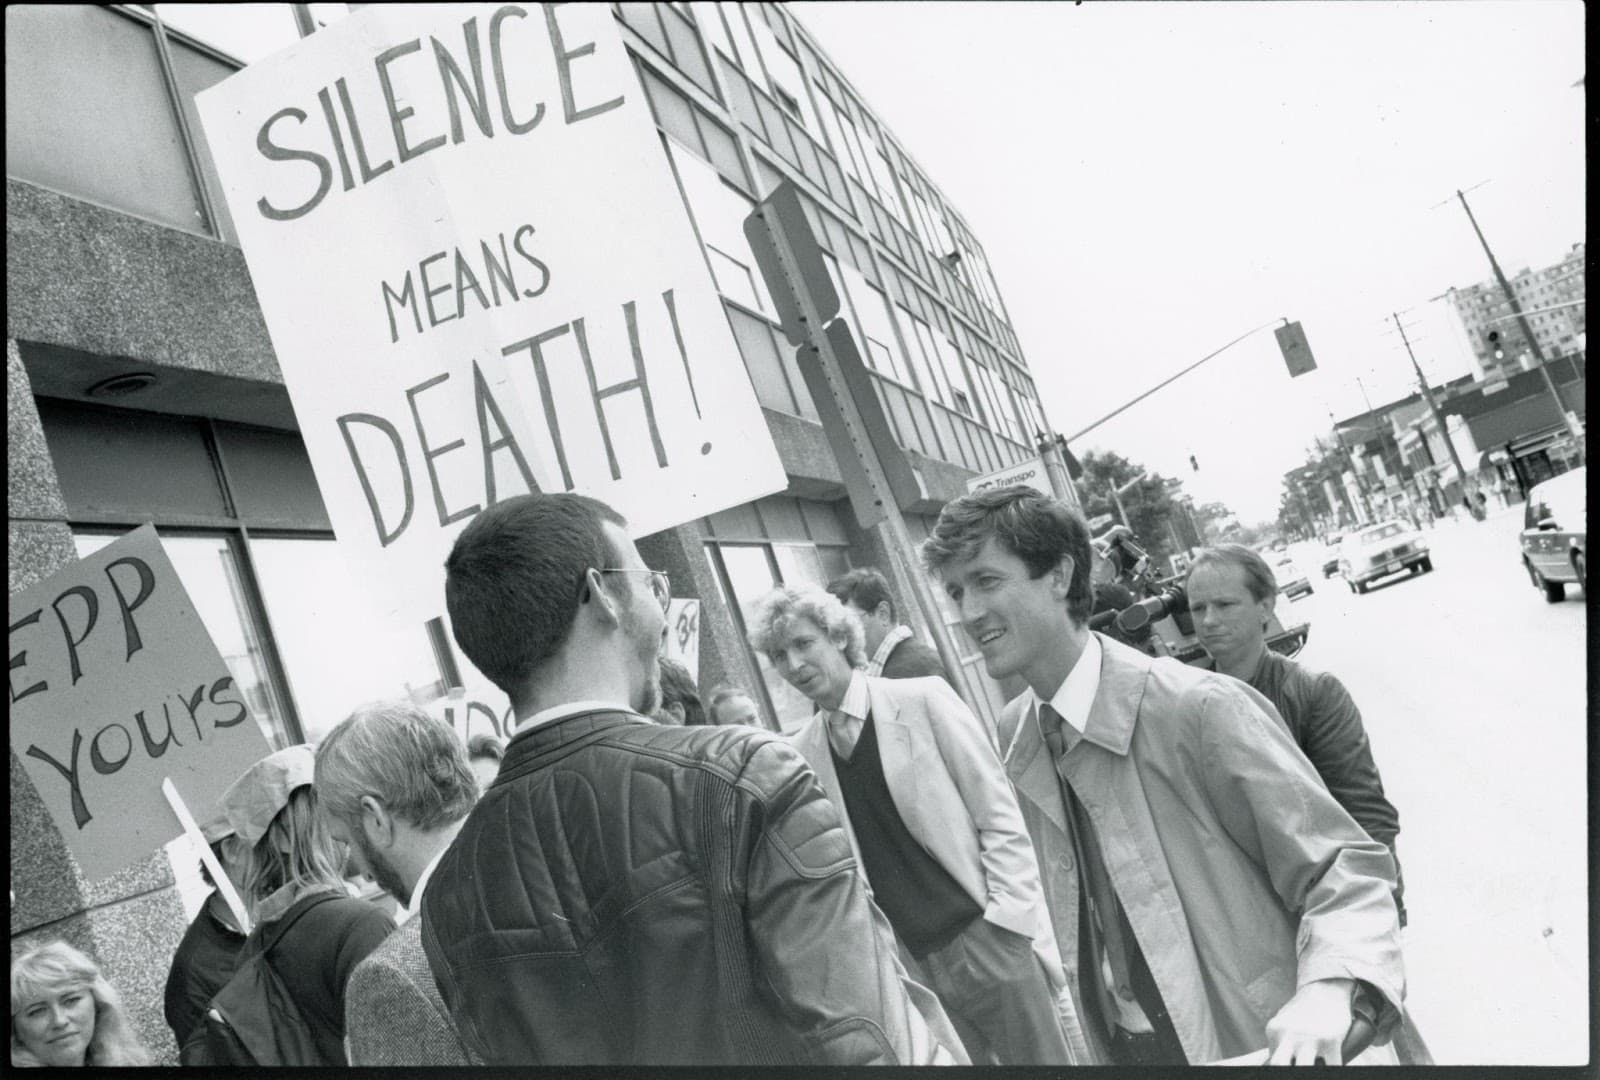 Photo of protestors standing near a building. One is holding a sign reading, “silence means death!” and another is holding a sign reading, “EPP yours.”